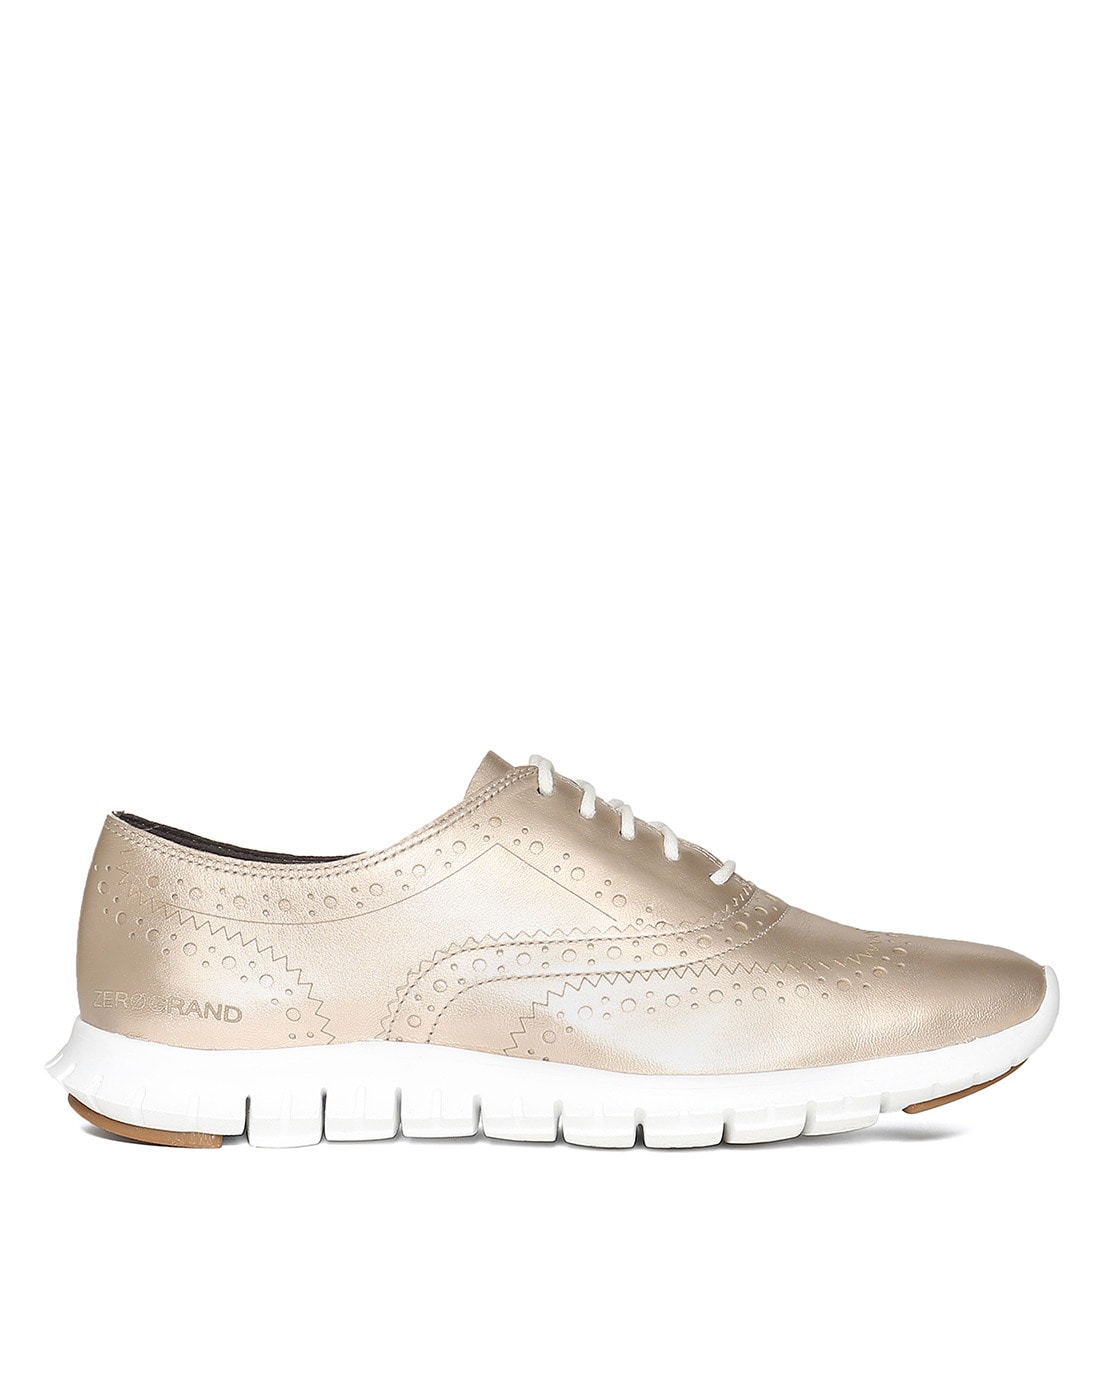 cole haan women's casual shoes